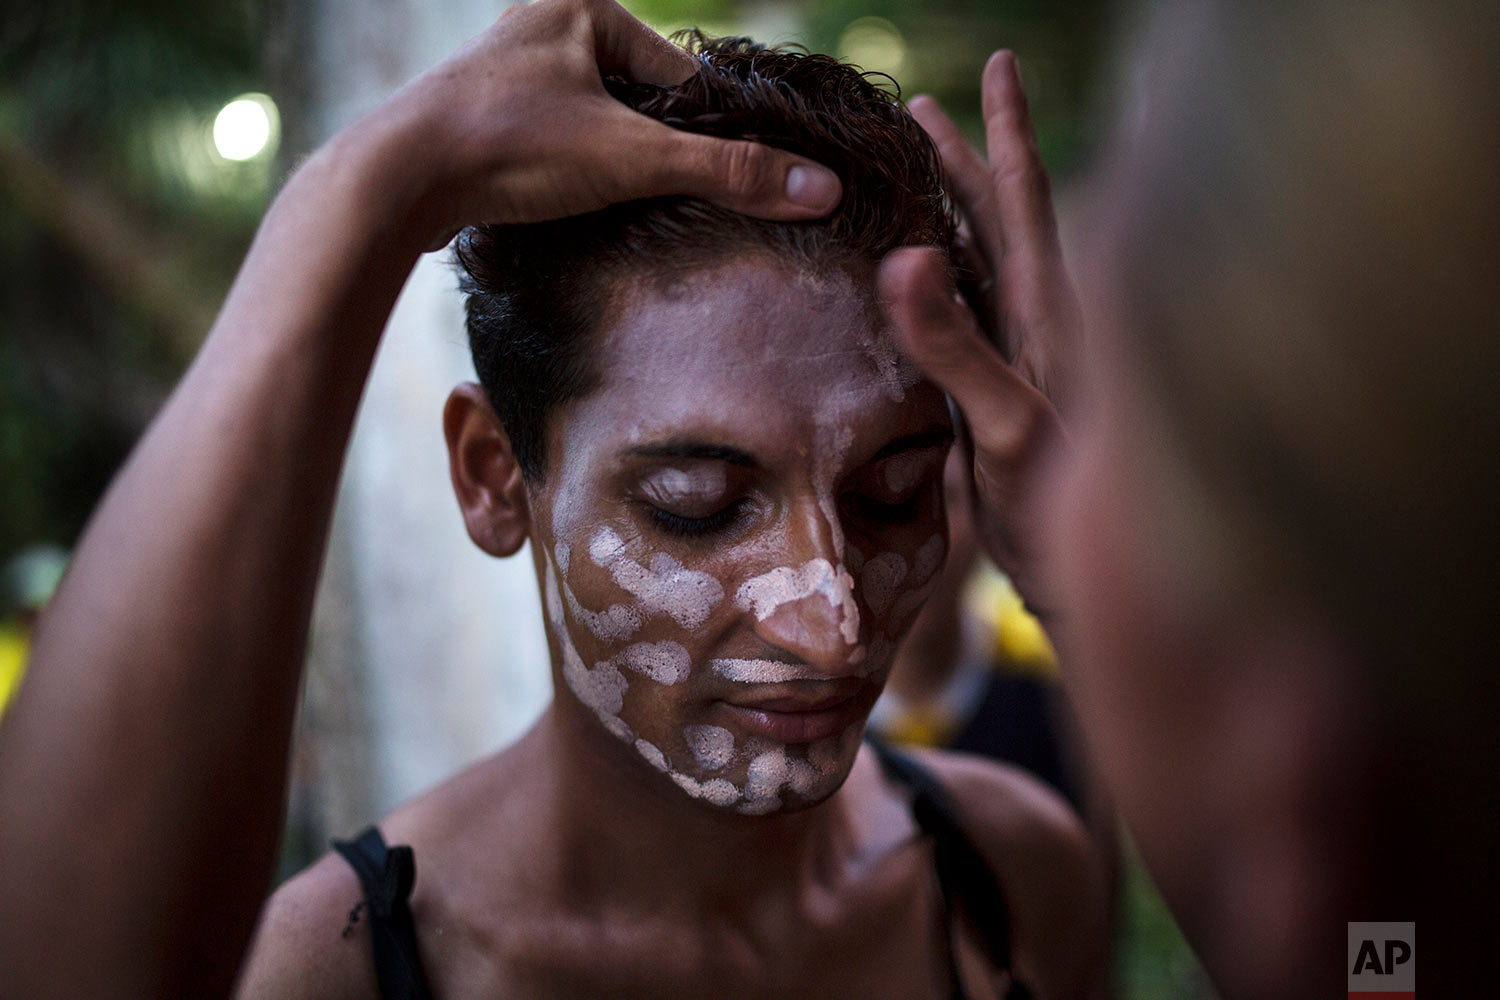  In this Nov. 1, 2018 photo, Honduran transgender Junior Castro, 22, who is part of the Central American migrants caravan hoping to reach the U.S. border, stands still as a friend applies foundation to her face, in Donaji, Mexico. (AP Photo/Rodrigo A